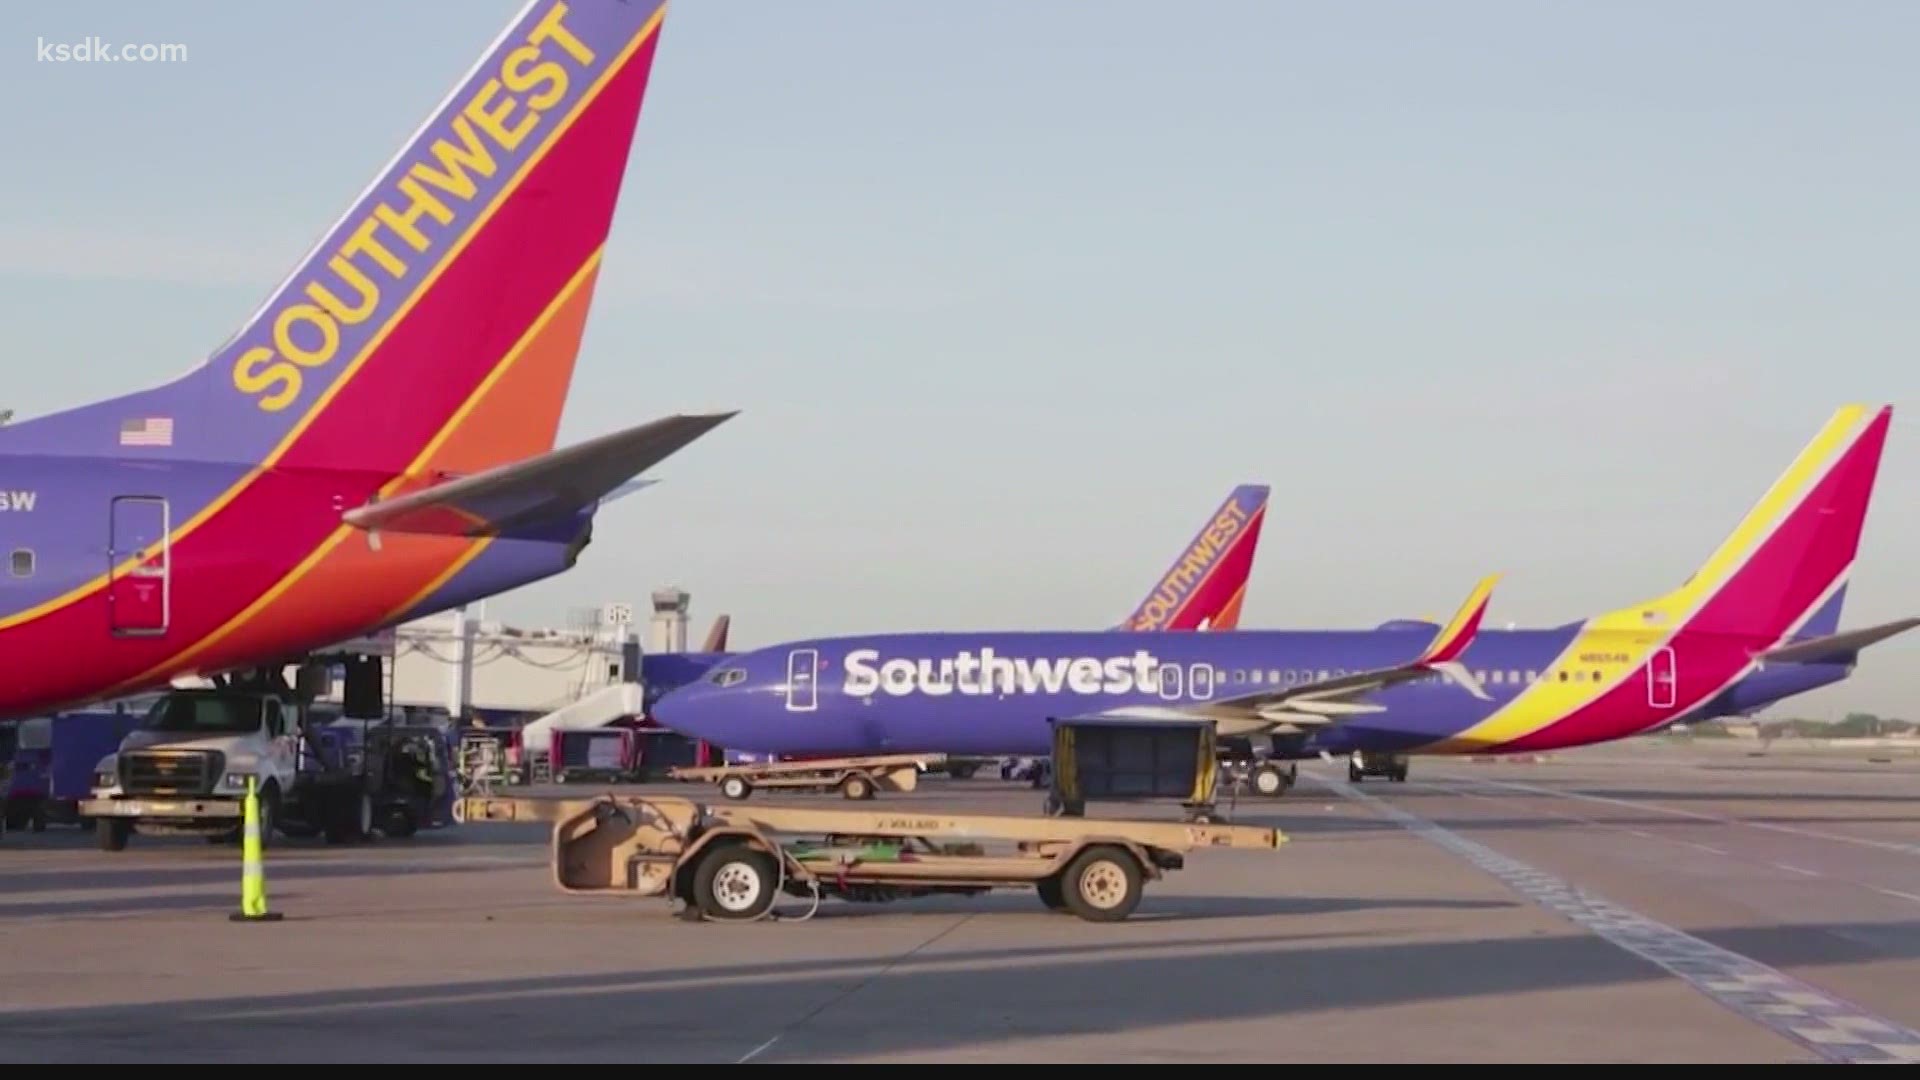 Southwest Airlines "WOW Sale" offering 29 flights for spring travel